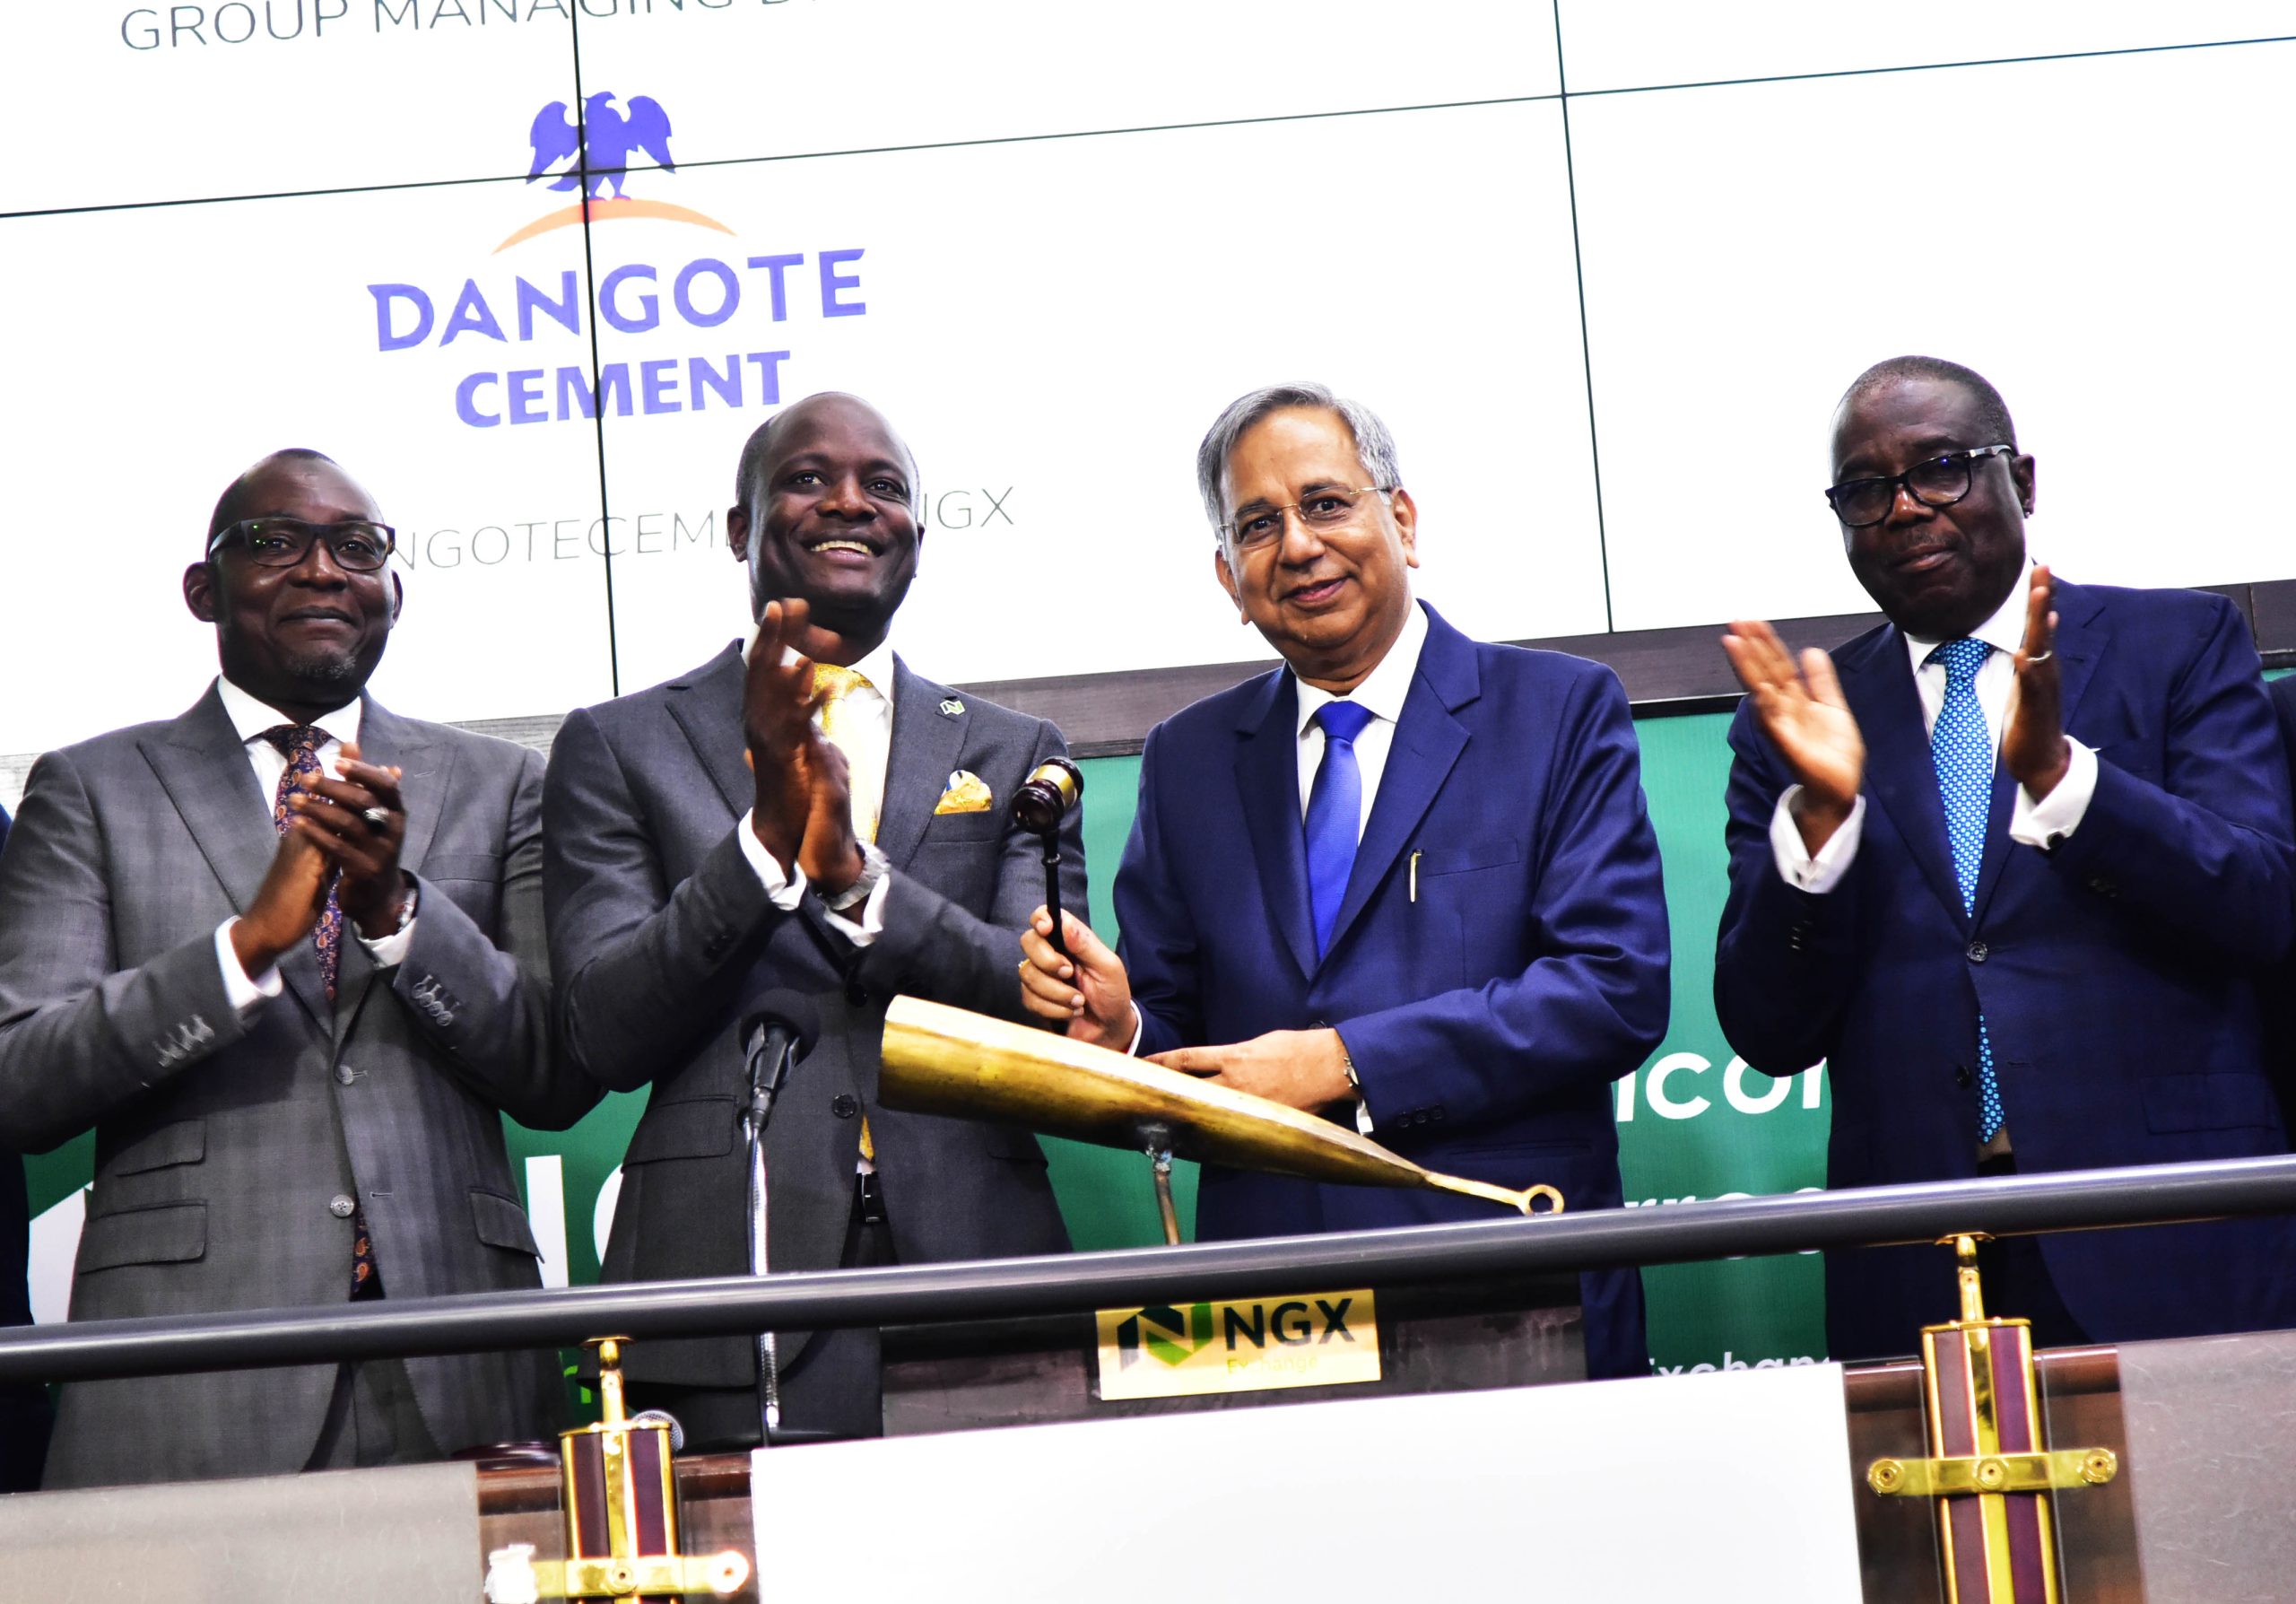 Dangote Cement increases capacity with new plants in Nigeria, Cote d’Ivoire, Ghana  